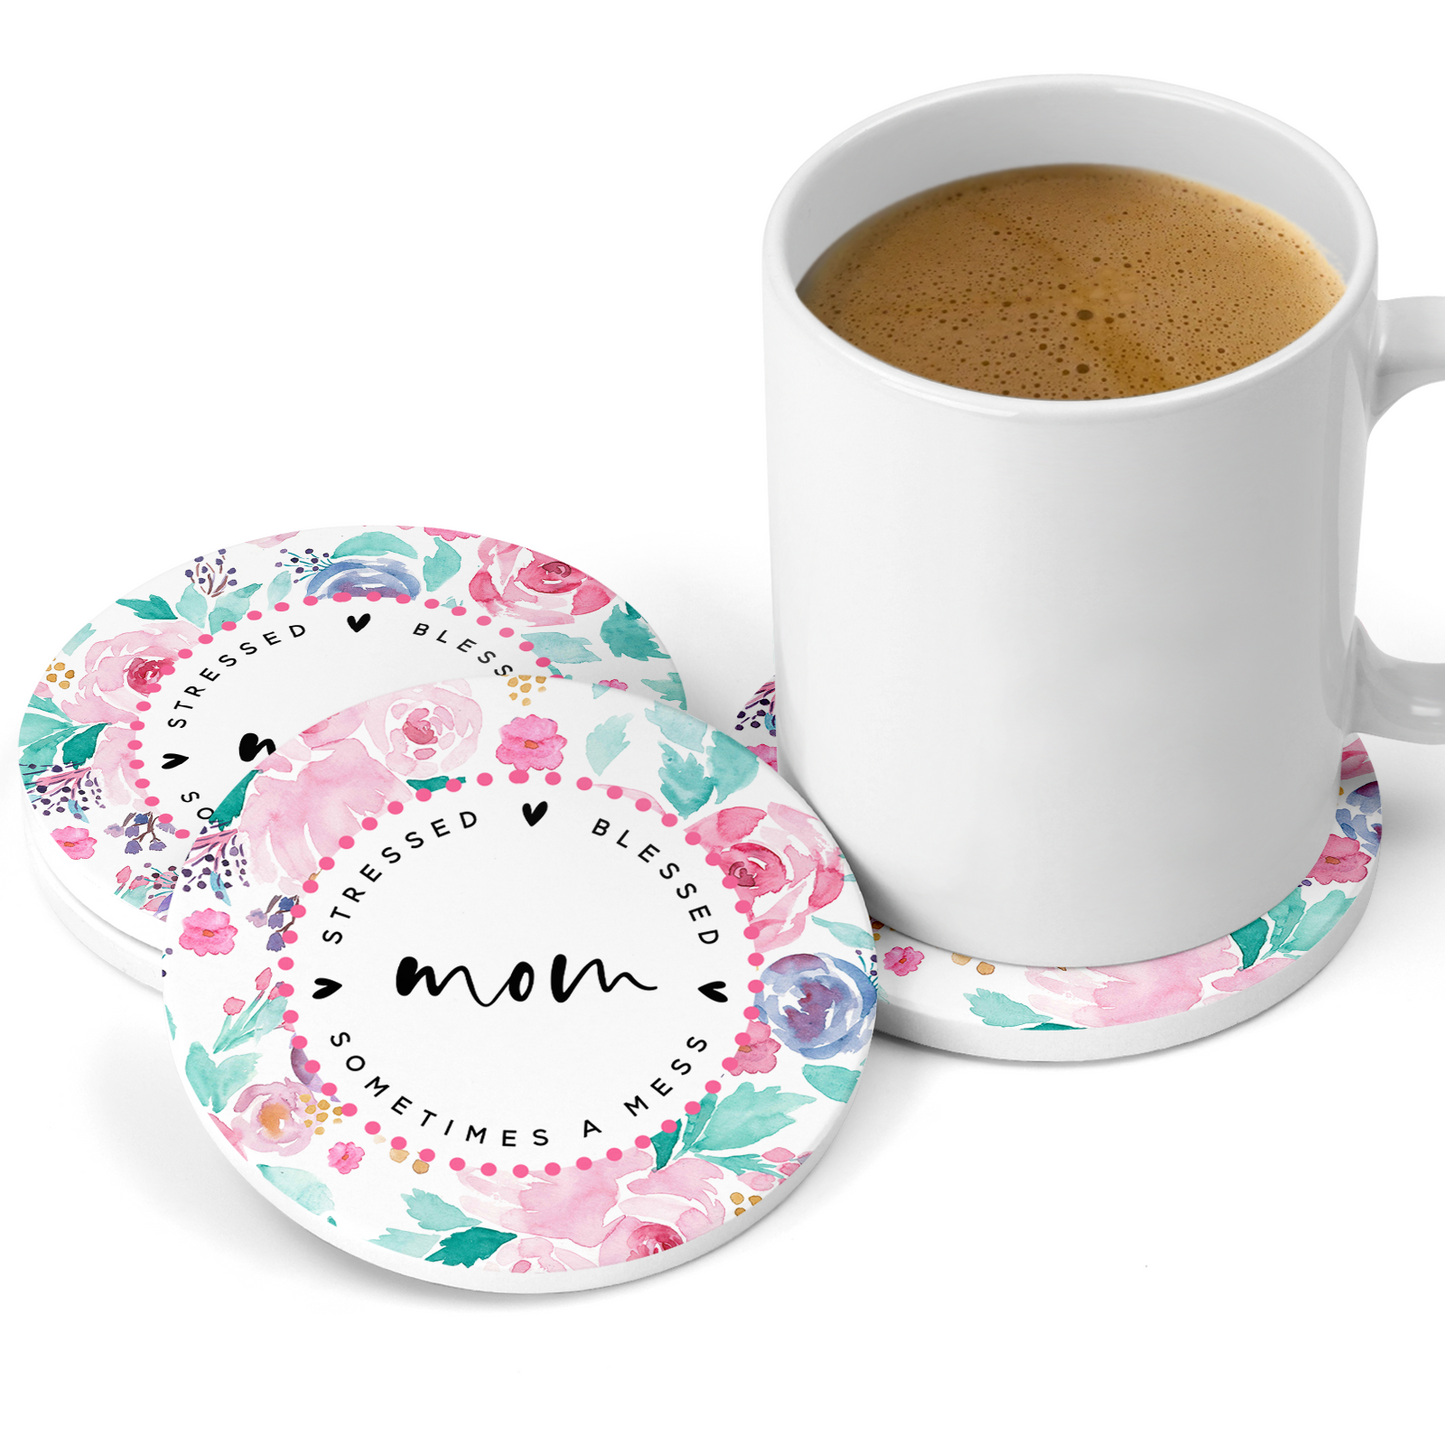 Stressed Blessed and Sometimes a Mess Mom Sandstone Coaster Set